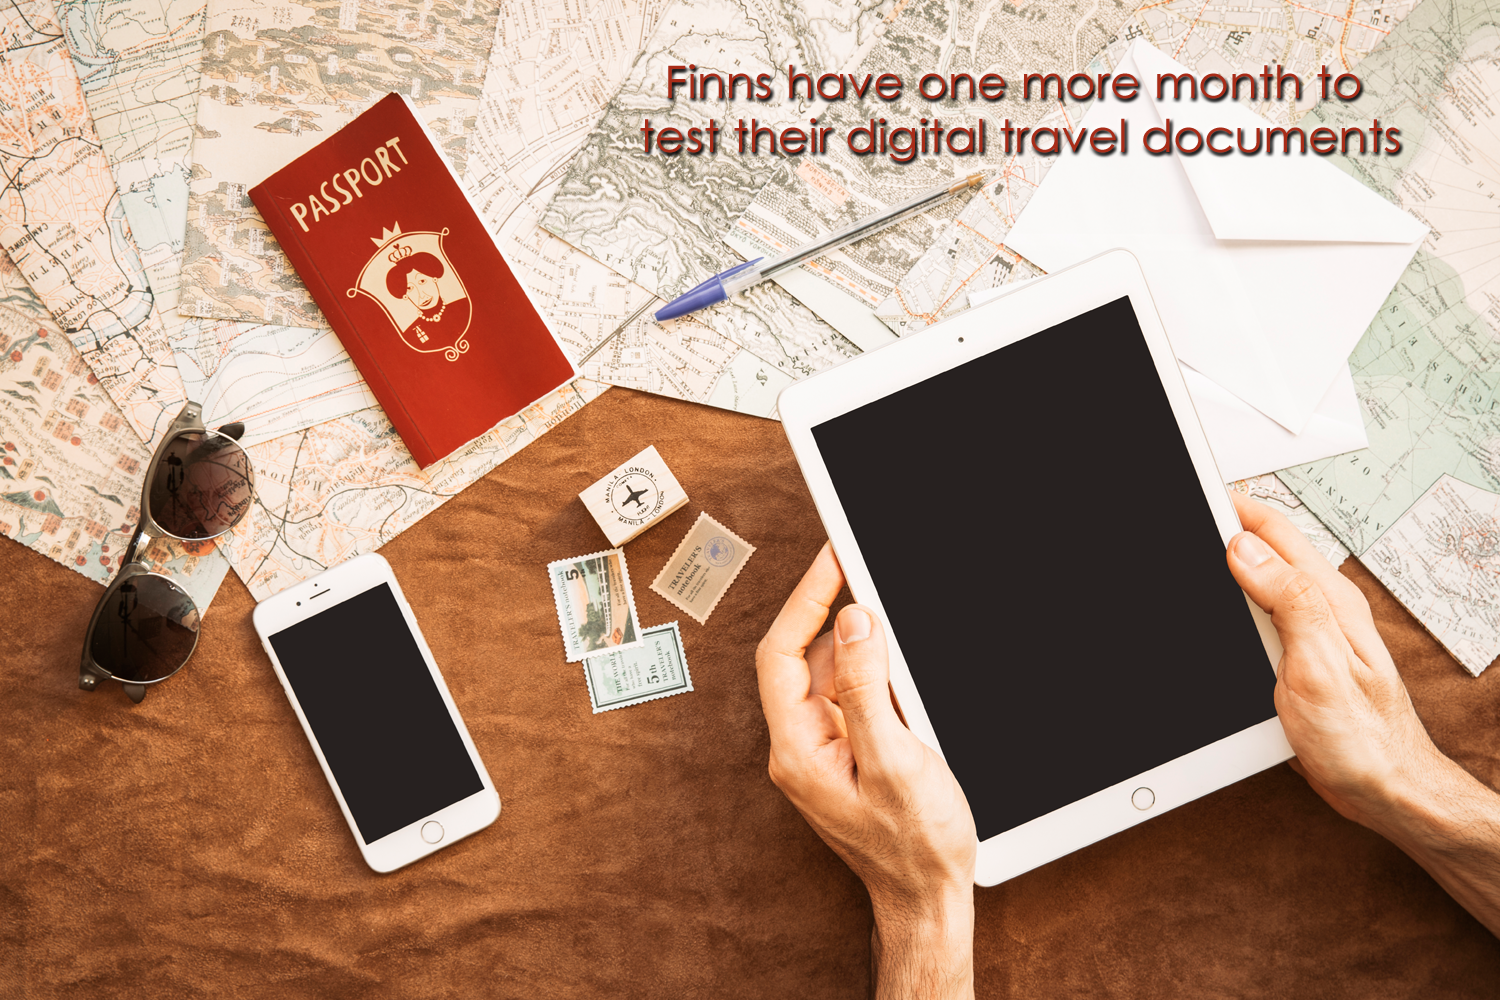 Finns have one more month to test their digital travel documents.